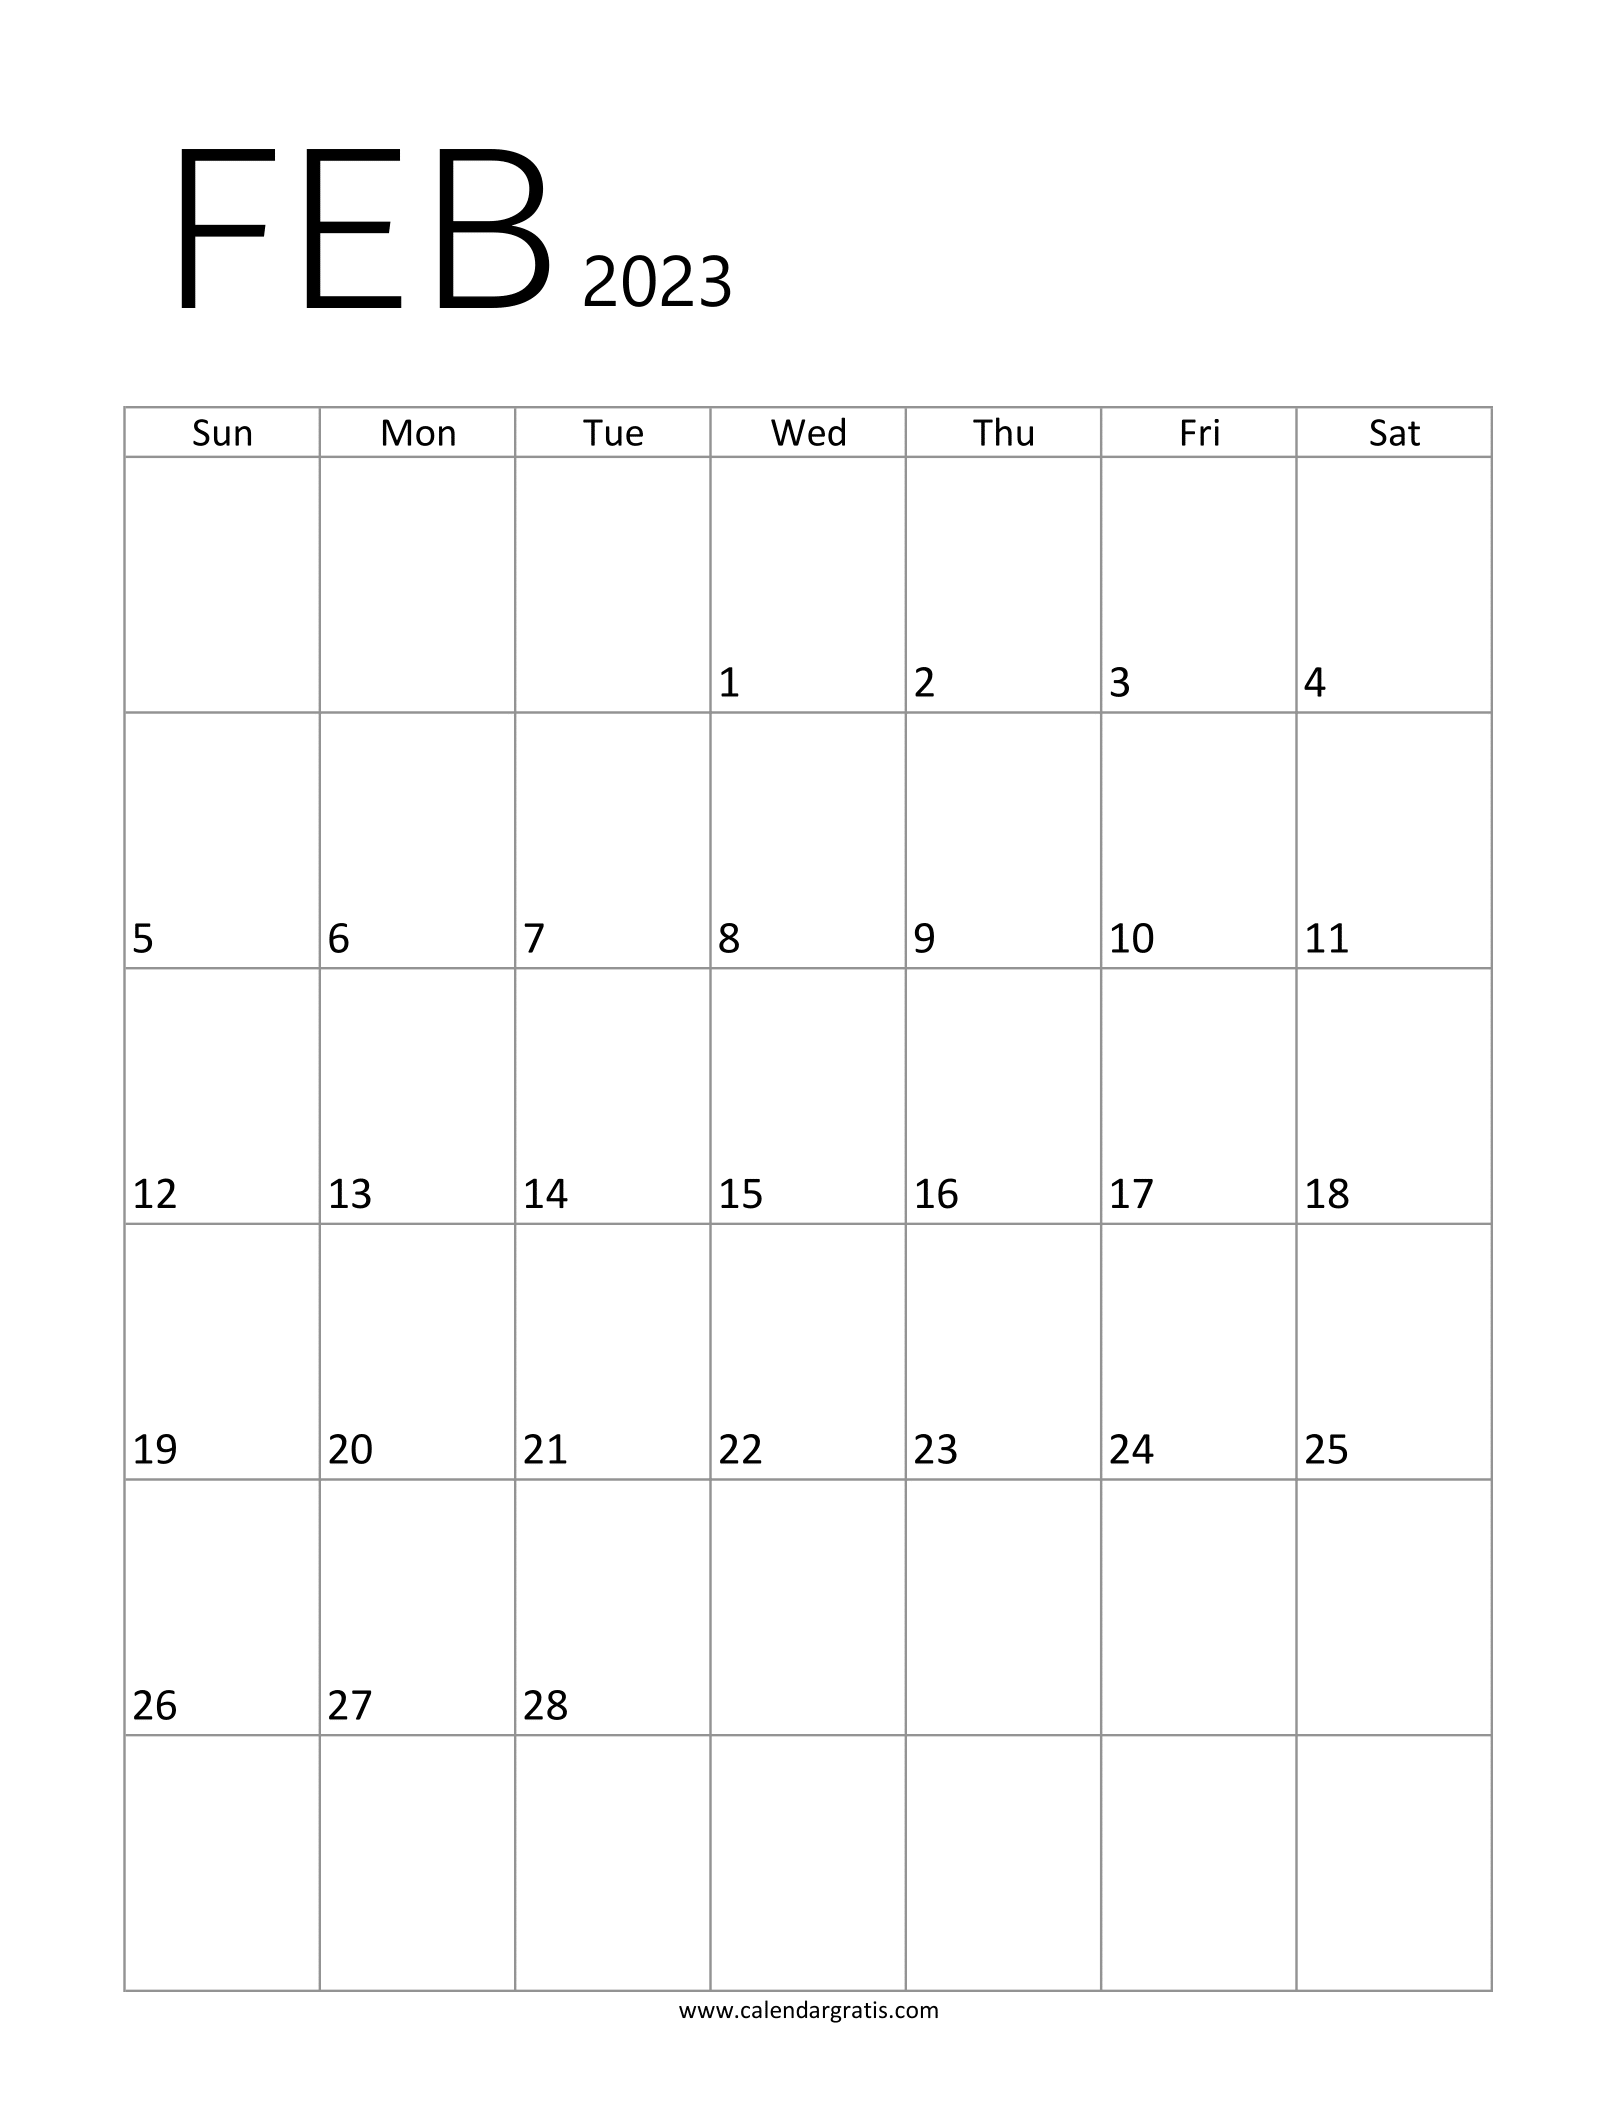 Printable Free February 2023 Calendar A4 Size Template. Downloadable February Month Calendar in Vertical Layout.